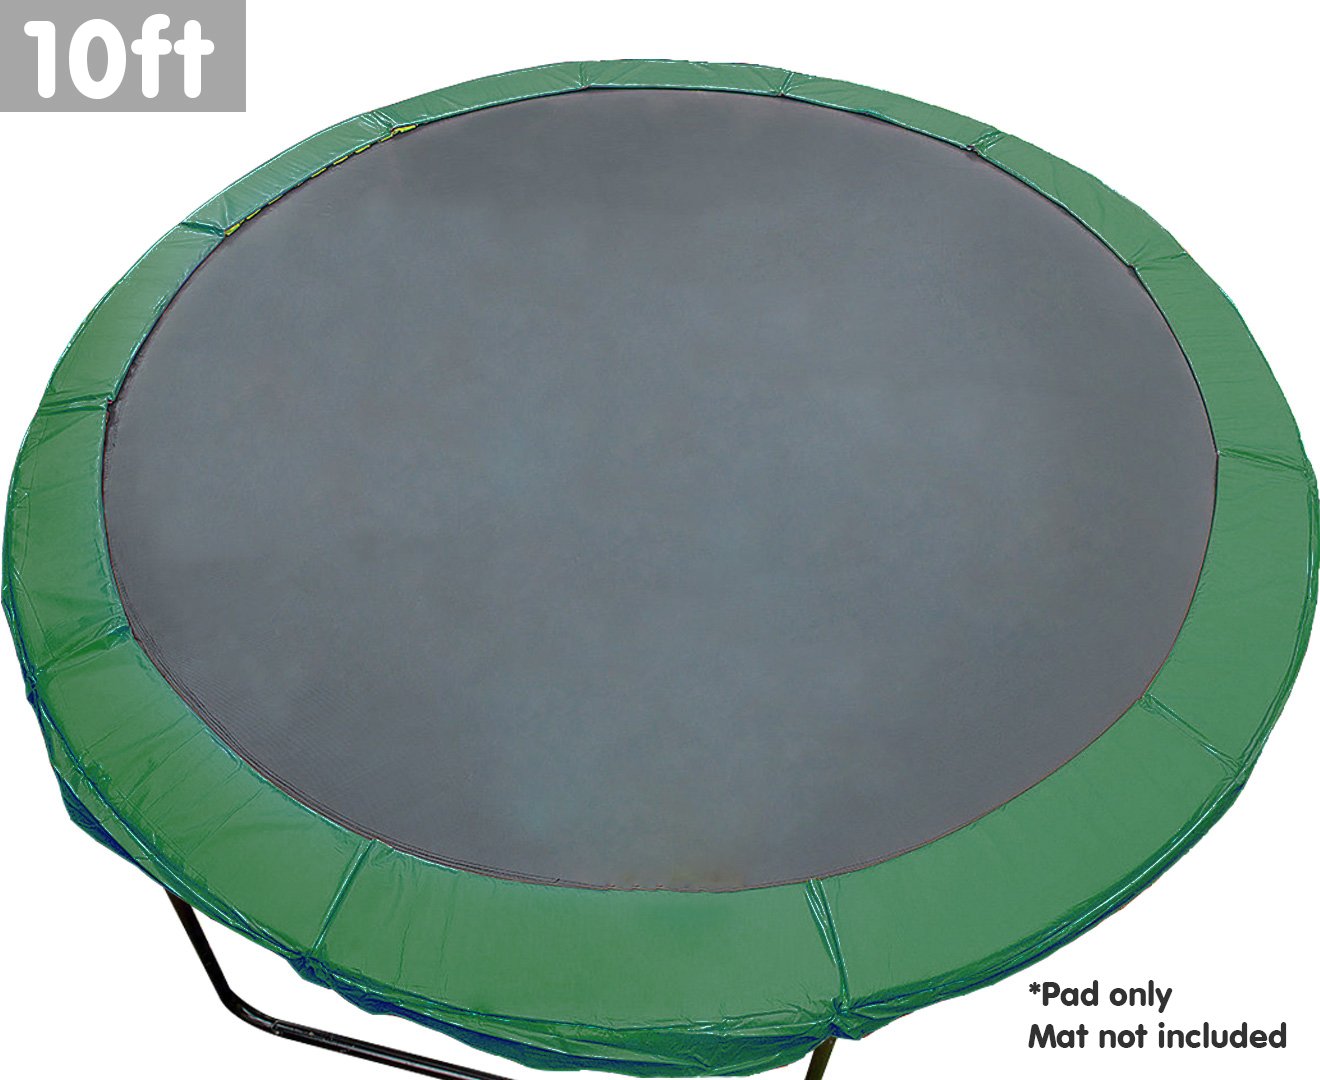 Trampoline 10ft Replacement Pad Outdoor Round Spring Cover Green 2